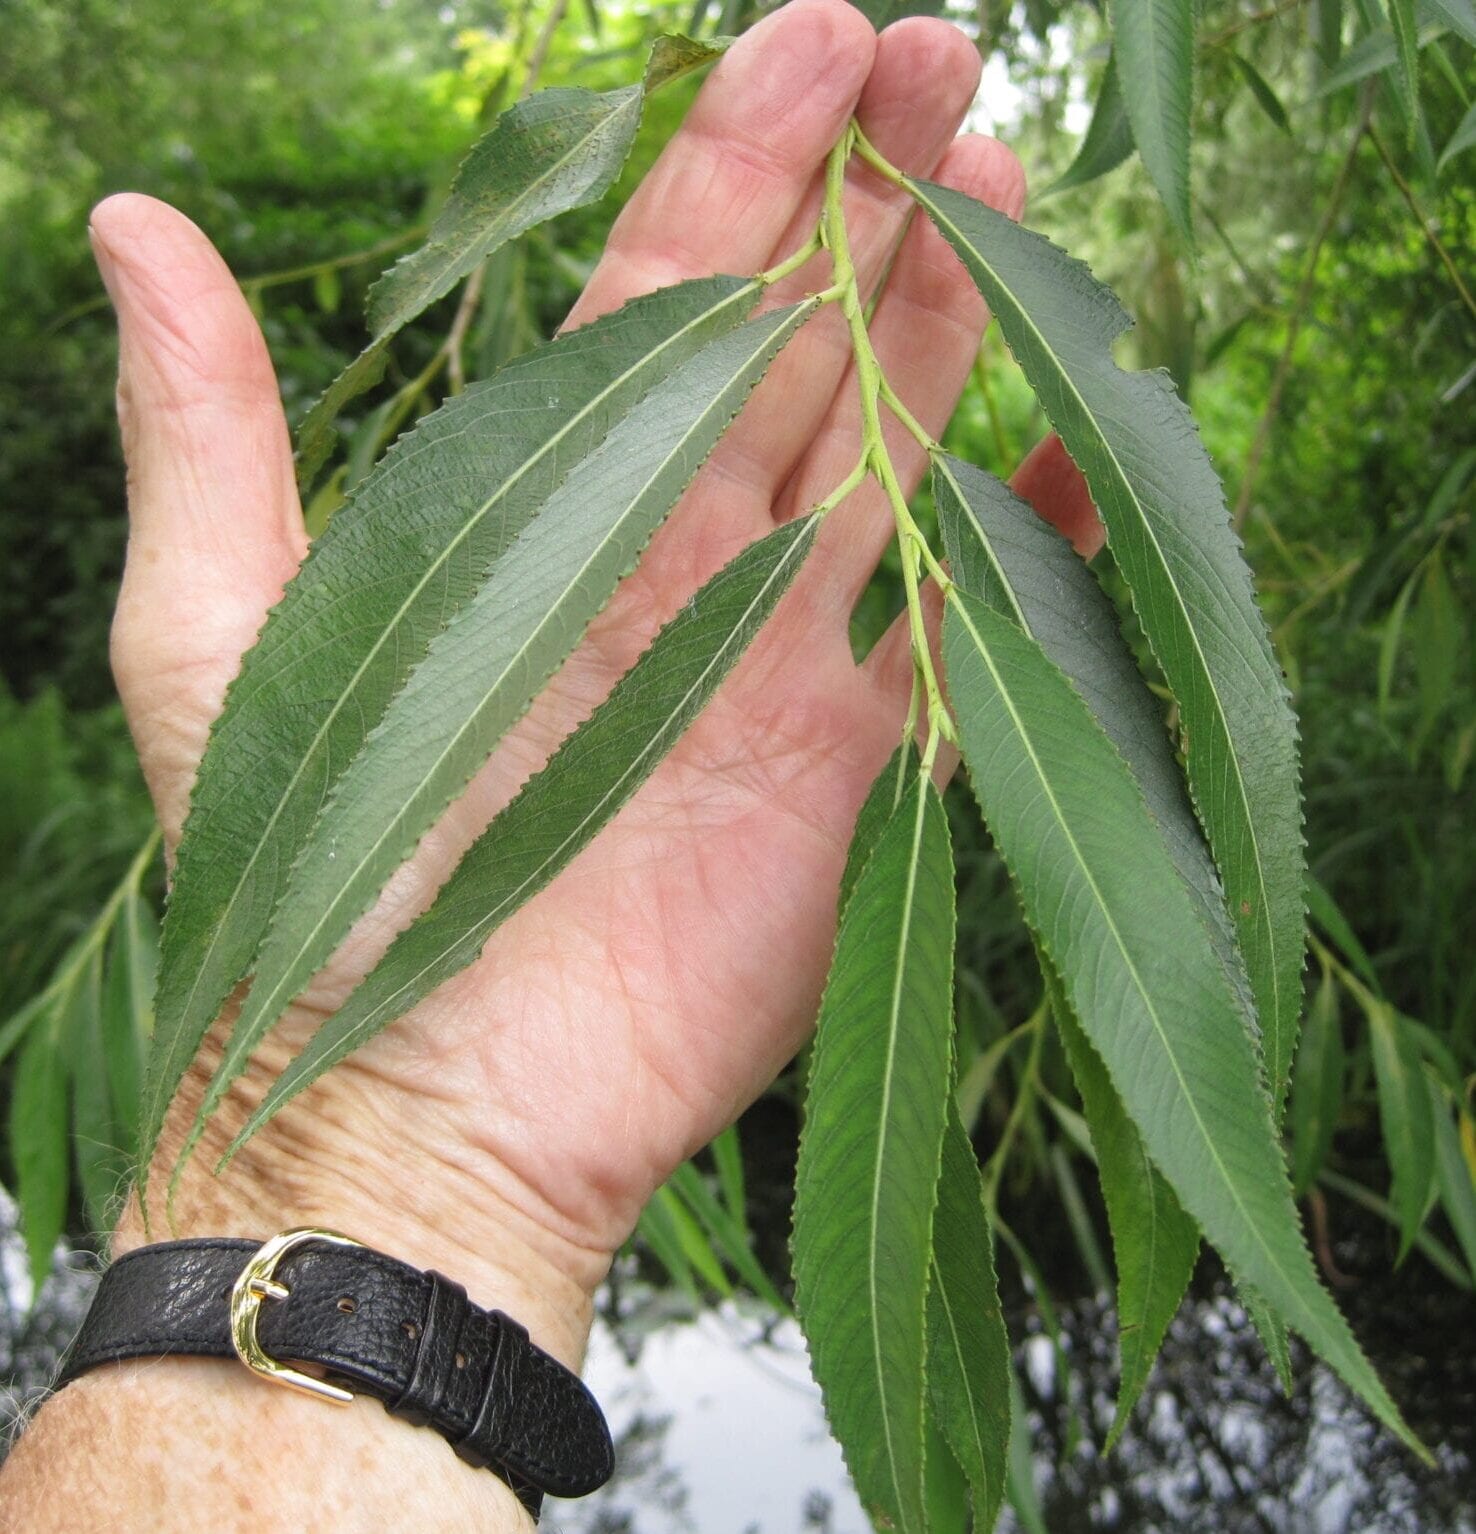 Crack Willow leaves